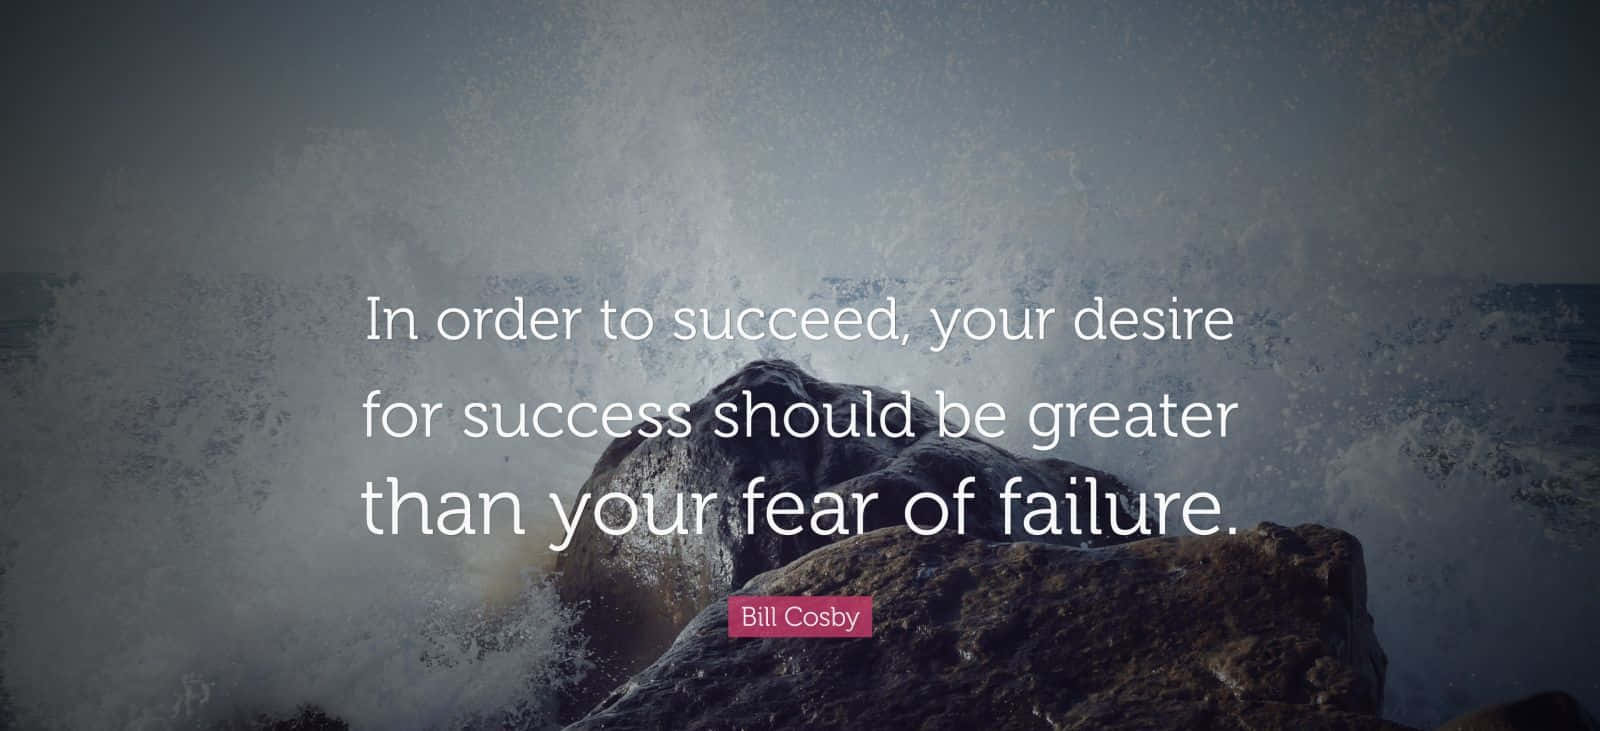 Success Over Fear Quote Wallpaper